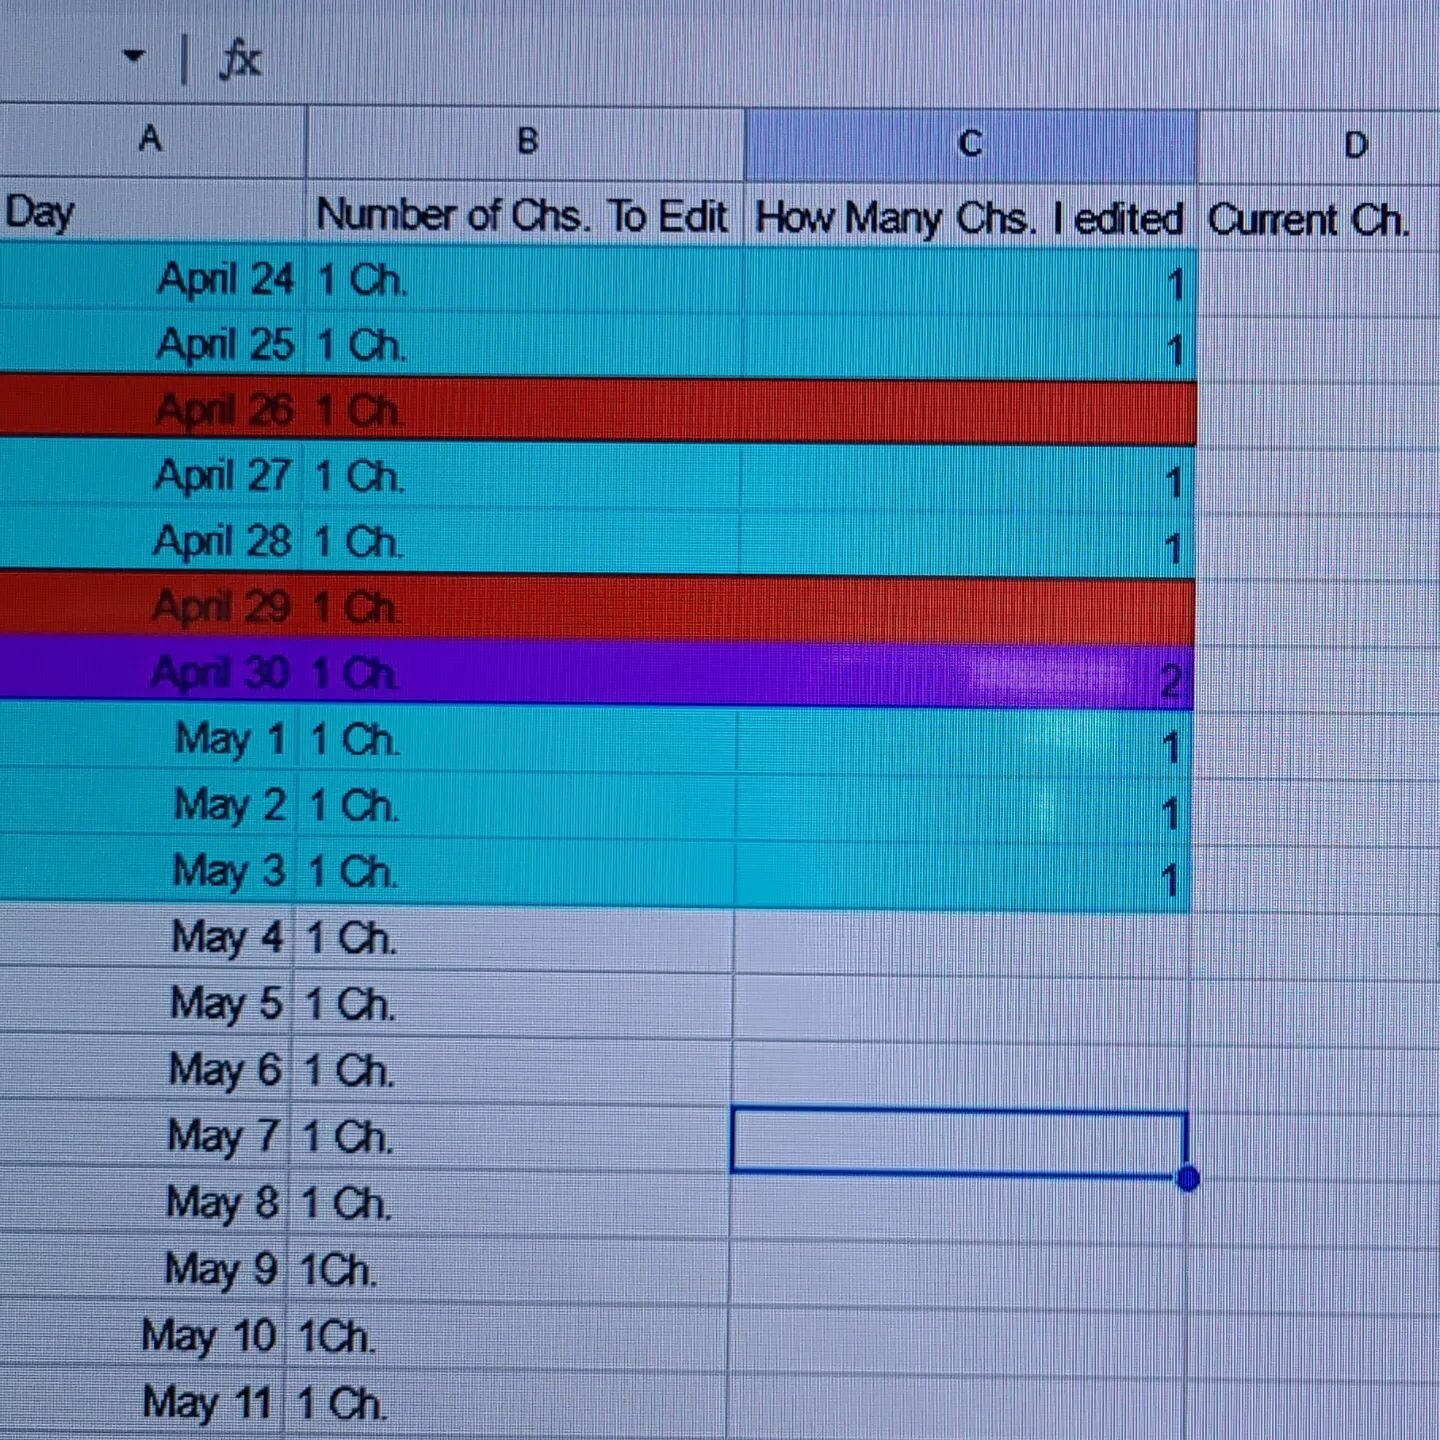 Editing goals for this draft. I only missed a few days. The red ones. But it's all going well and pretty well as planned. 1 chapter a day and I should be done edits in a month! Exciting stuff! Only about 26 chapters to go. #backtoediting #editing #th